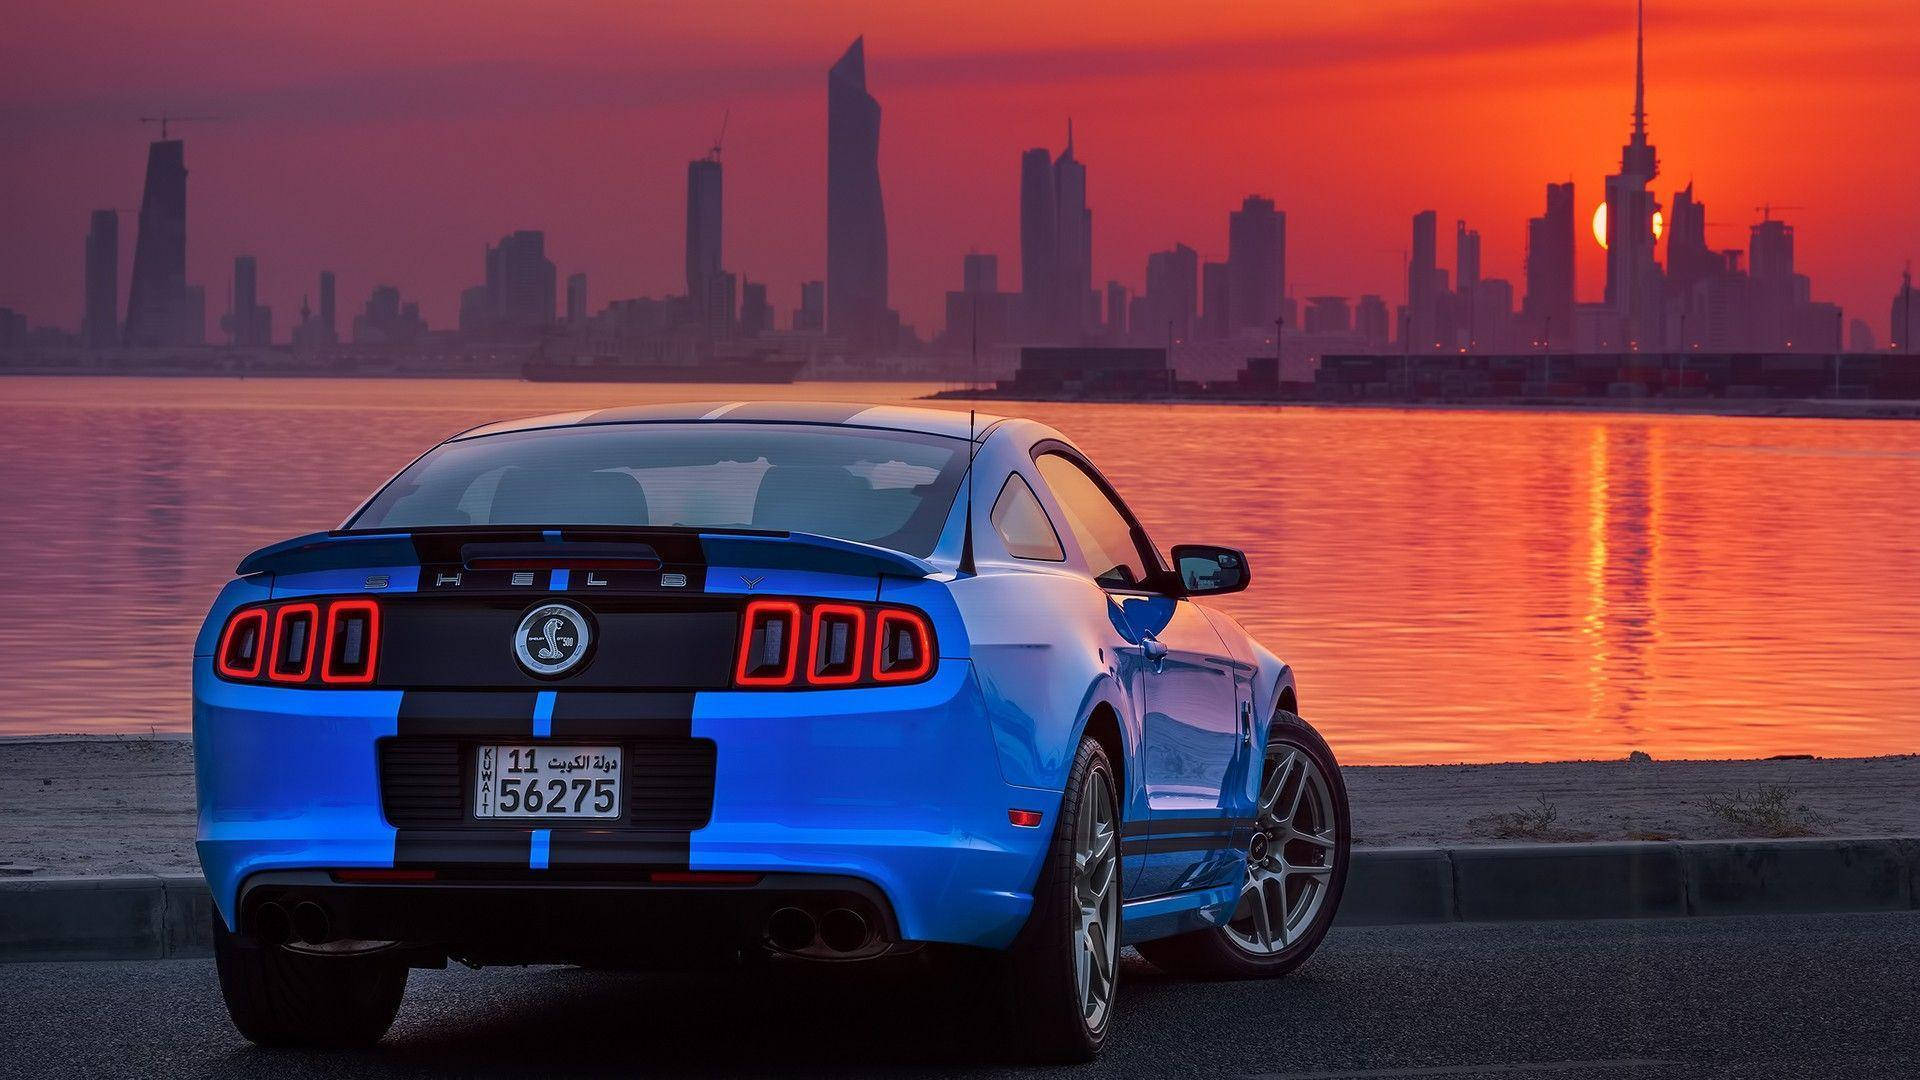 Kuwait City With Ford Shelby